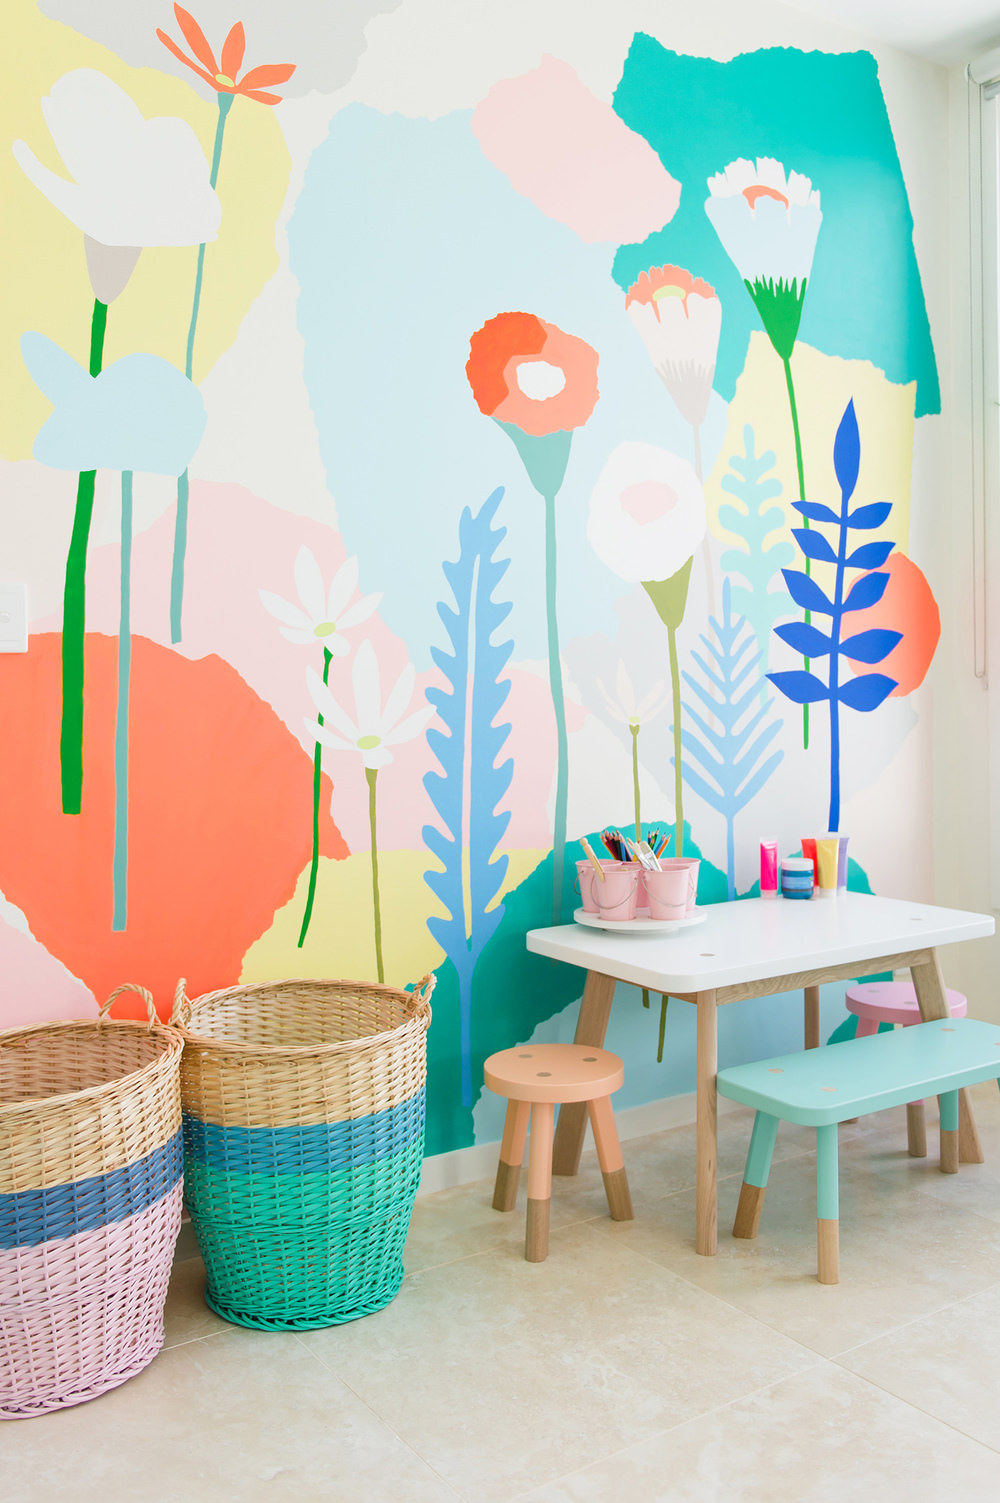 DIY Wall Mural Ideas for Kids - 10 Easy Projects • The Budget Decorator